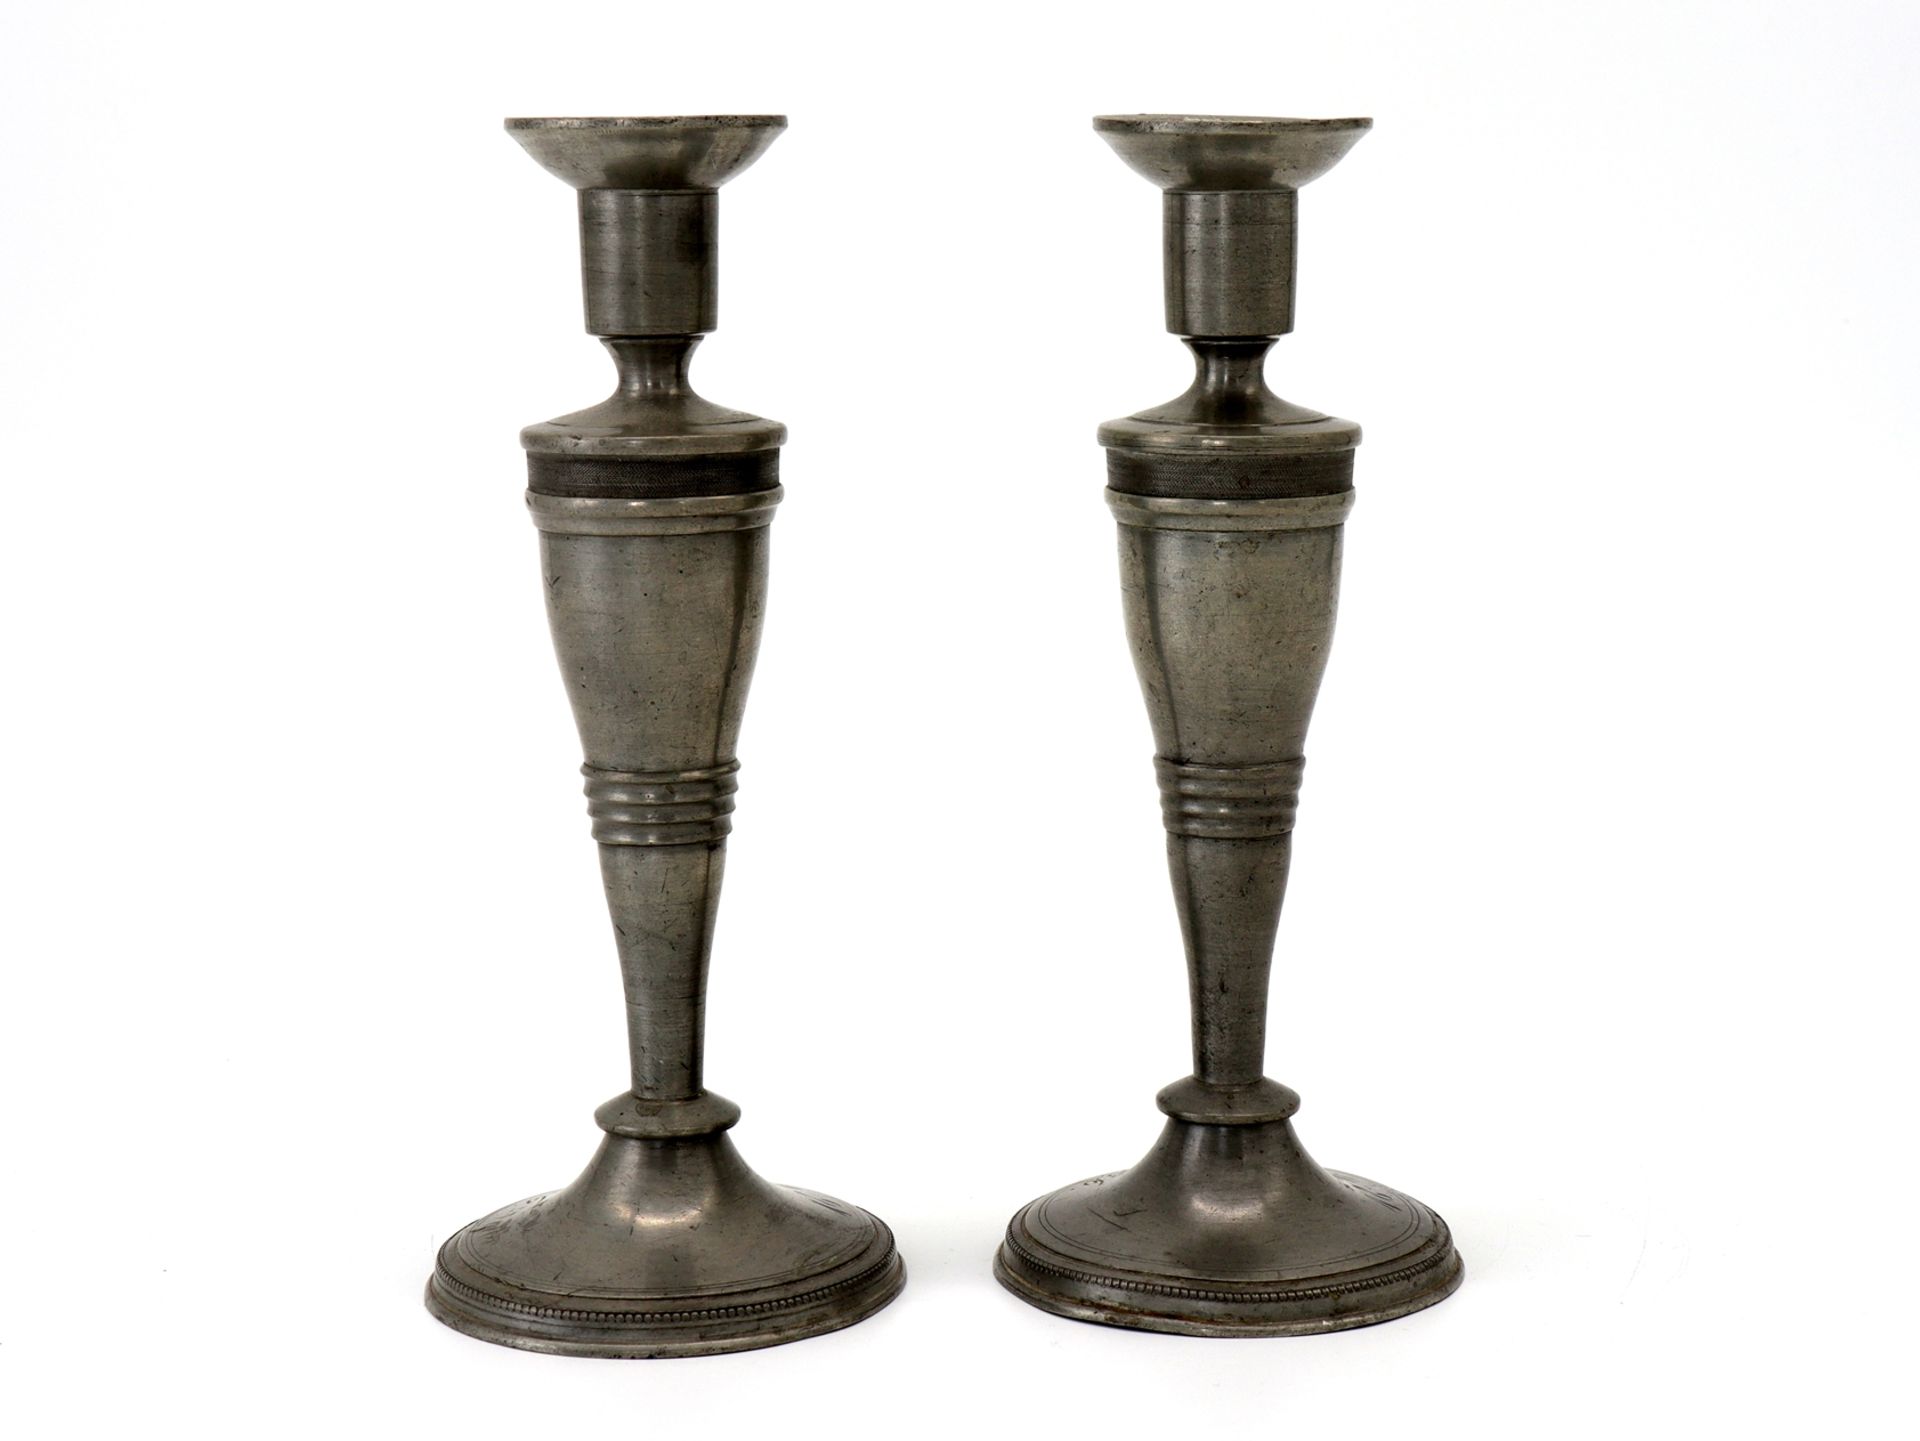 Pair of candlesticks pewter, dated 1886 - Image 2 of 6